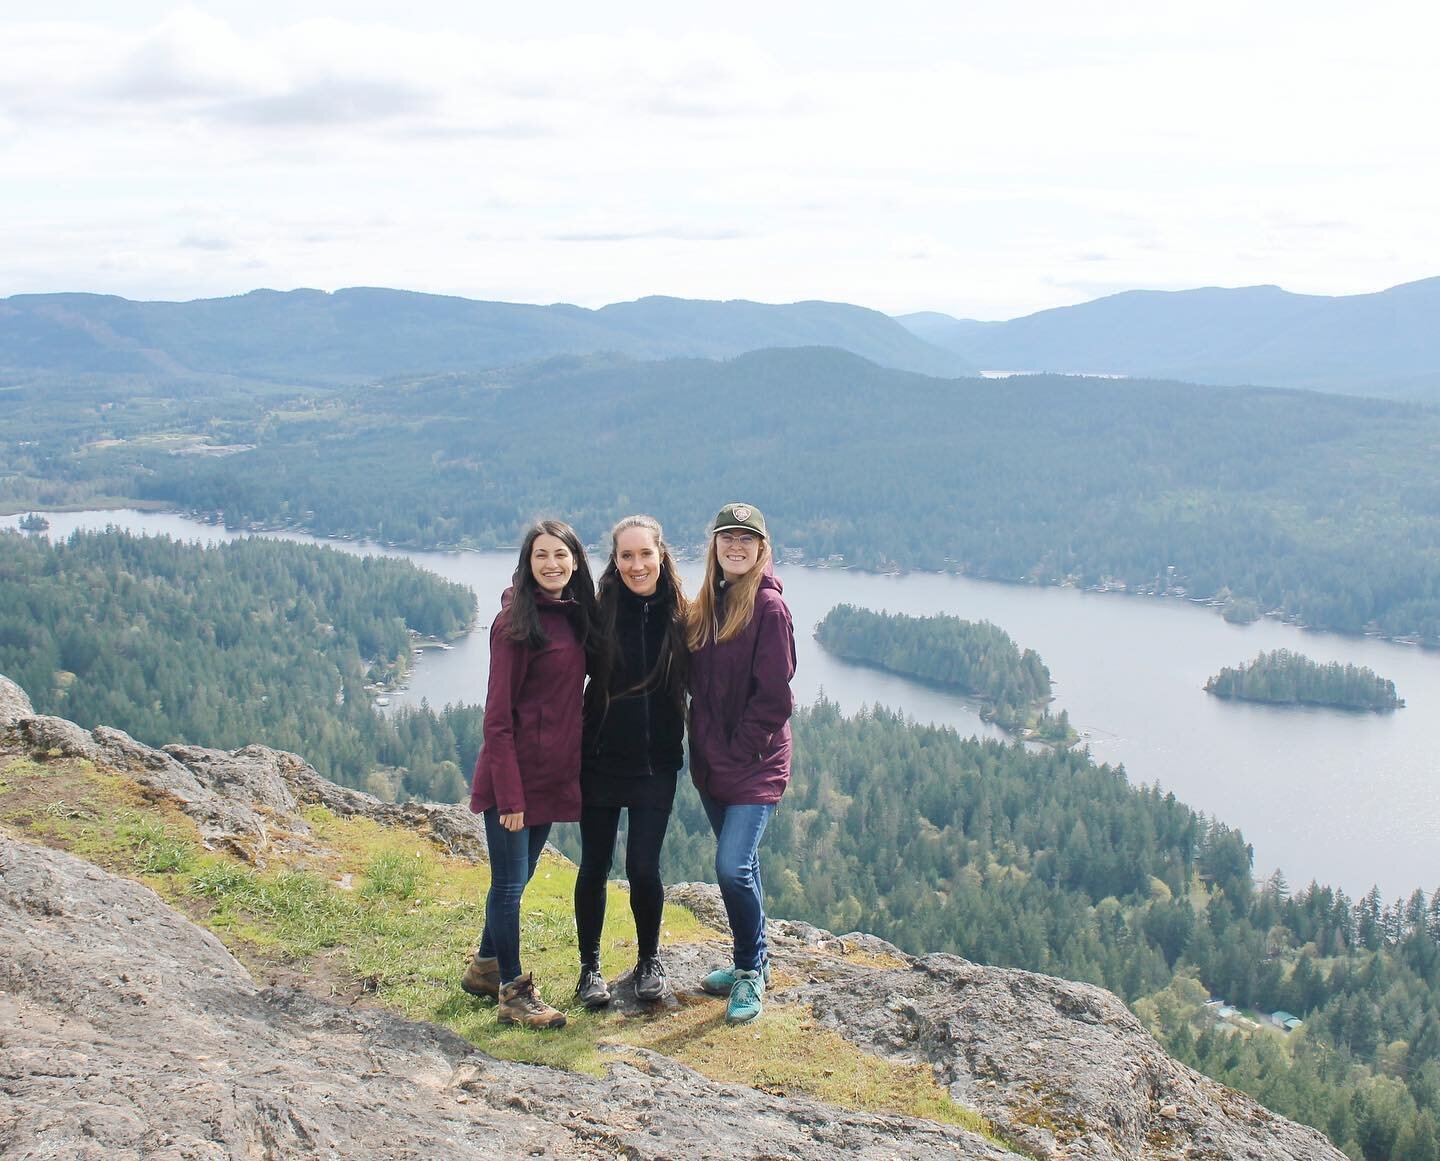 Mountains and singing are good for the soul ⛰️🎶

A lovely hike and song session at the top with @charlotte_germaine_ @jenmauel 🌿